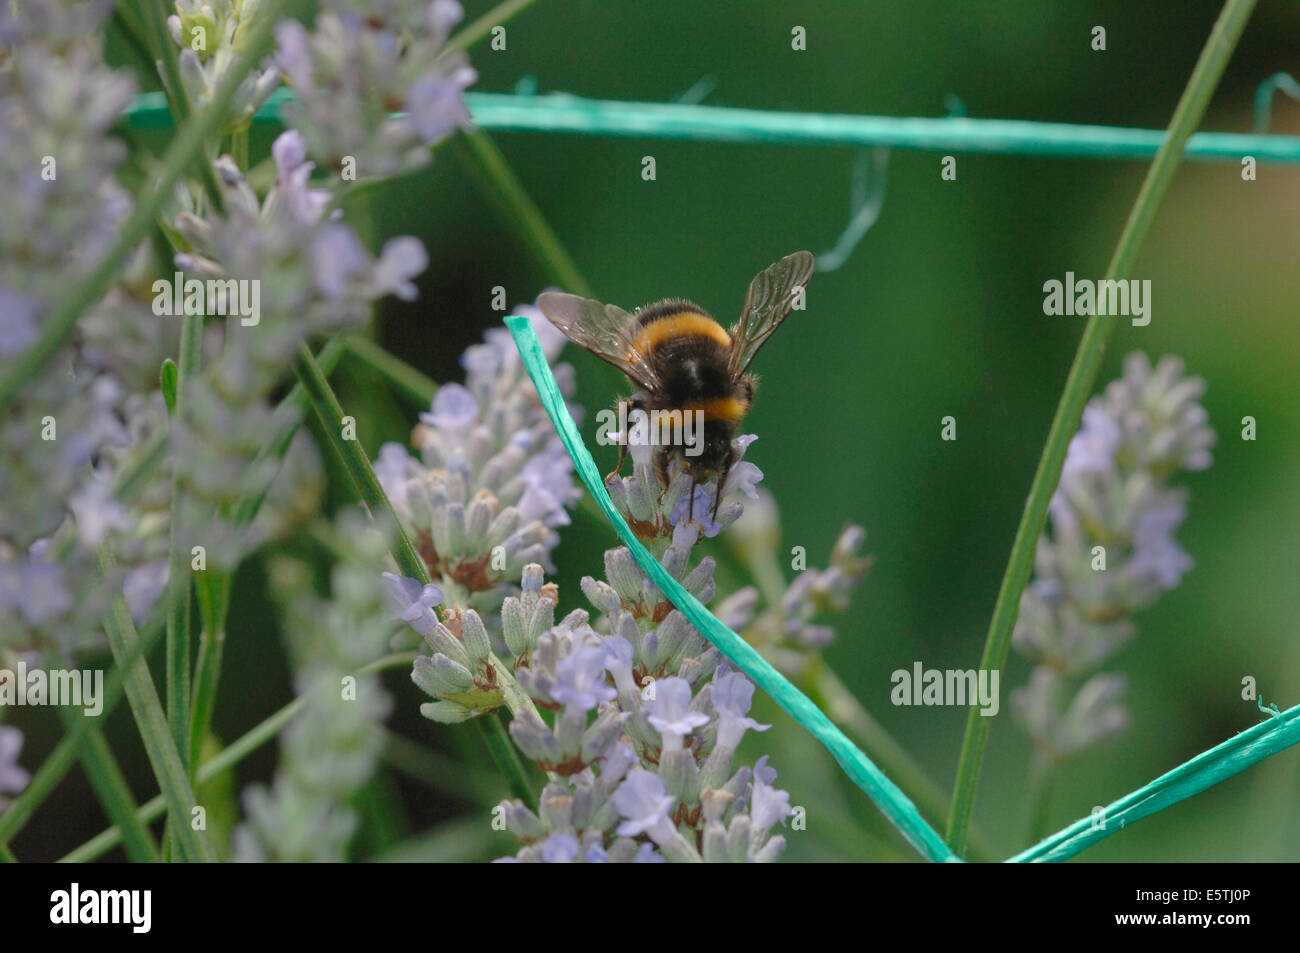 A Buff-Tailed Bumble Bee On Lavender Flowers.(Bombus terrestris). Stock Photo